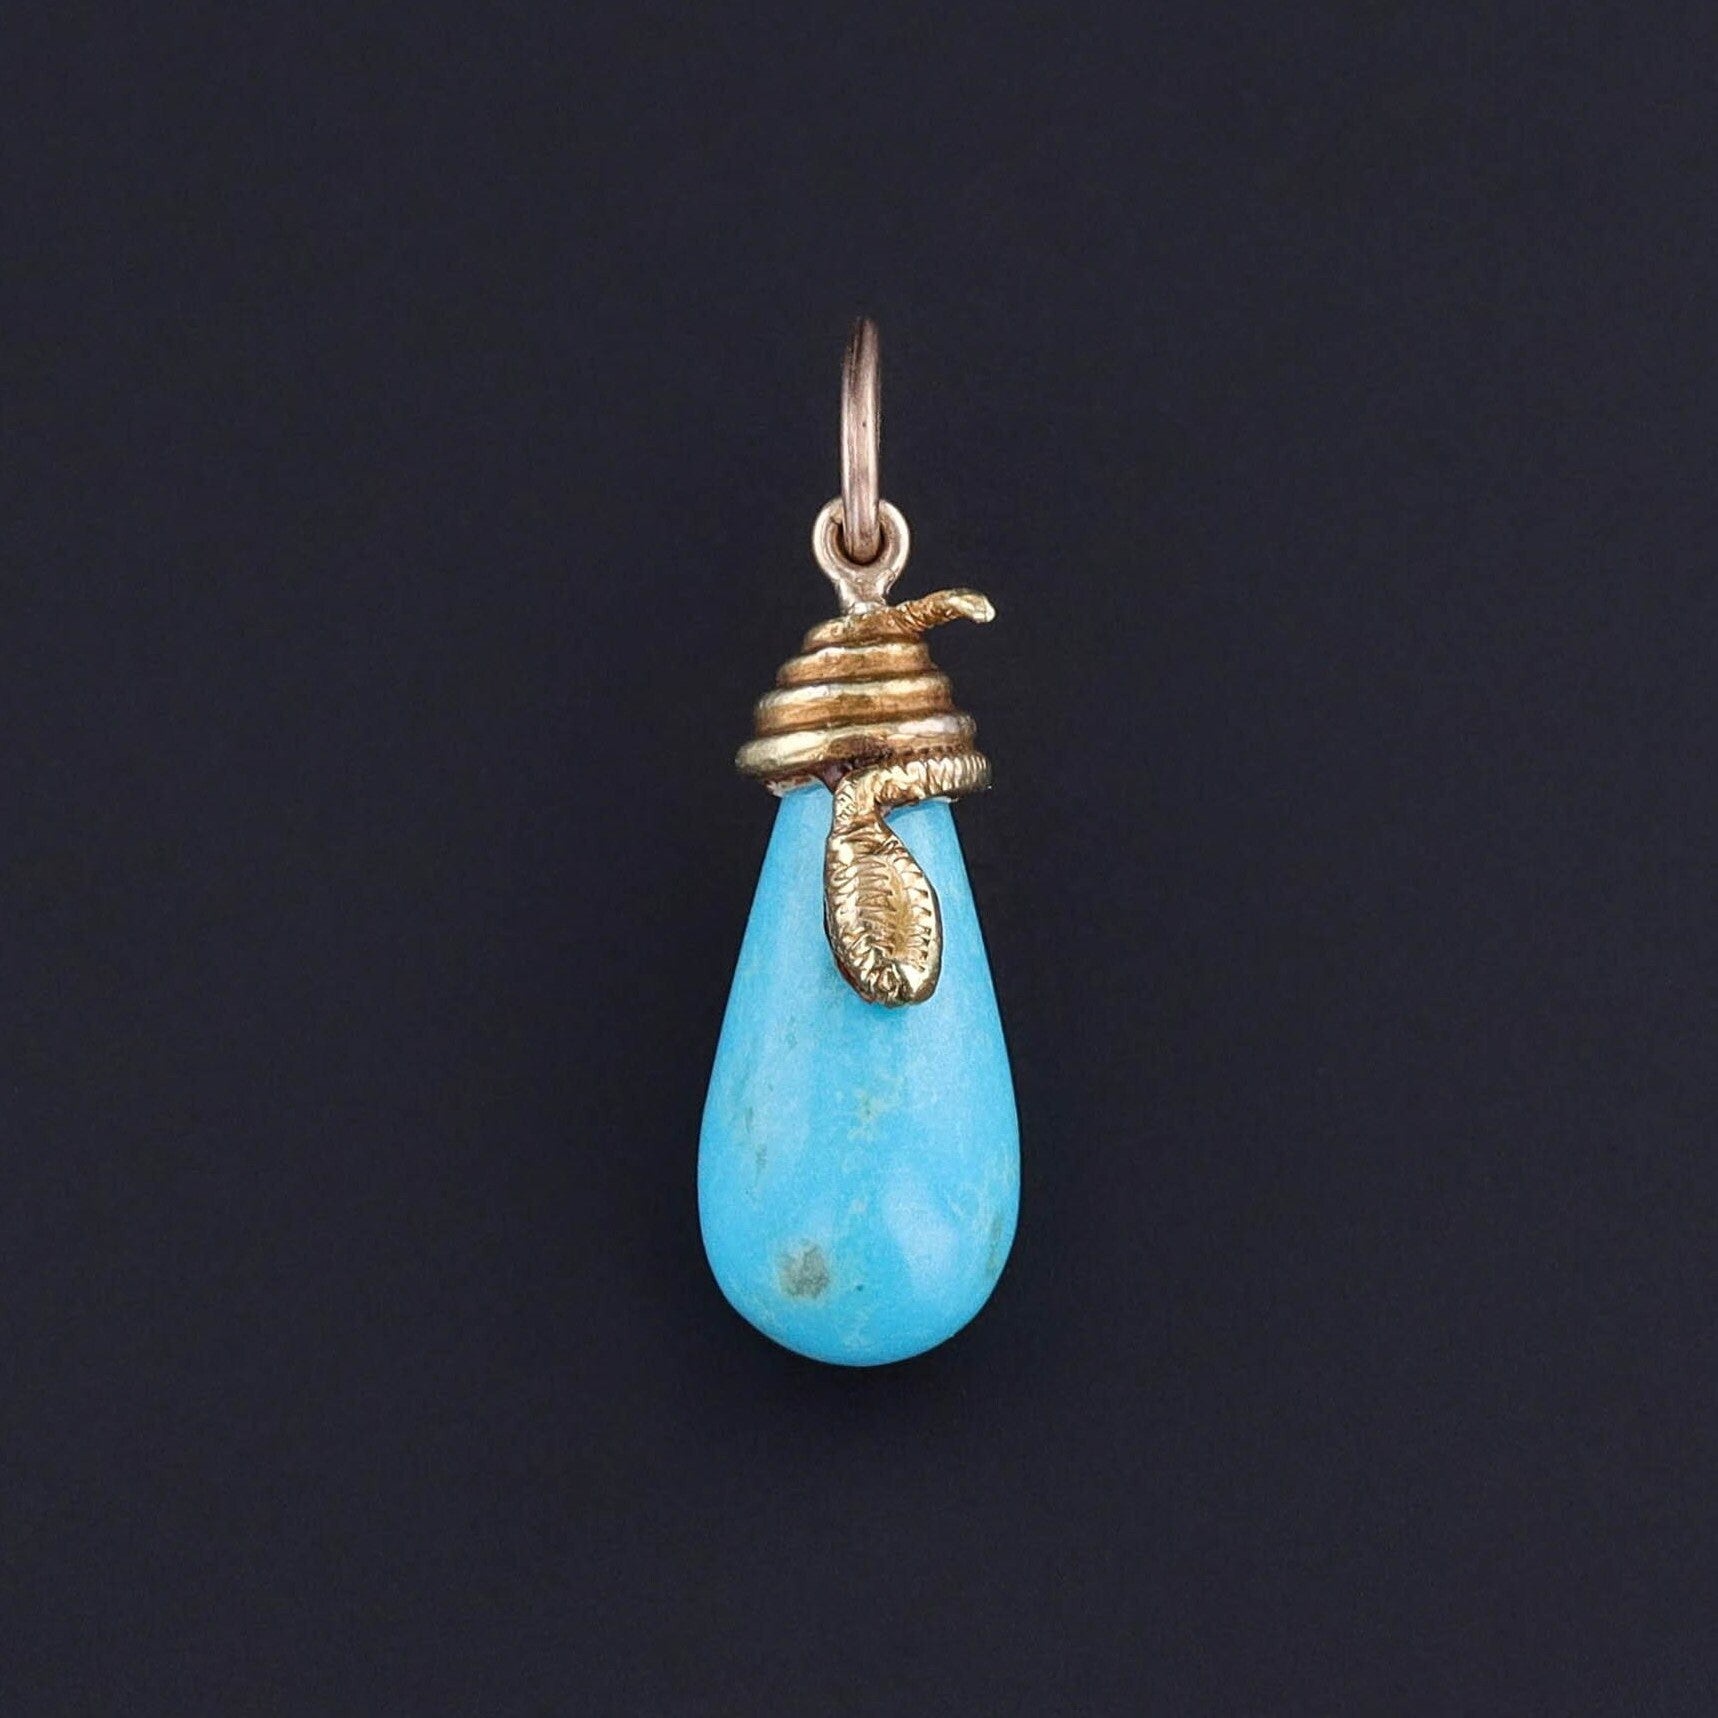 Antique Turquoise Snake Conversion Charm of 14k Gold